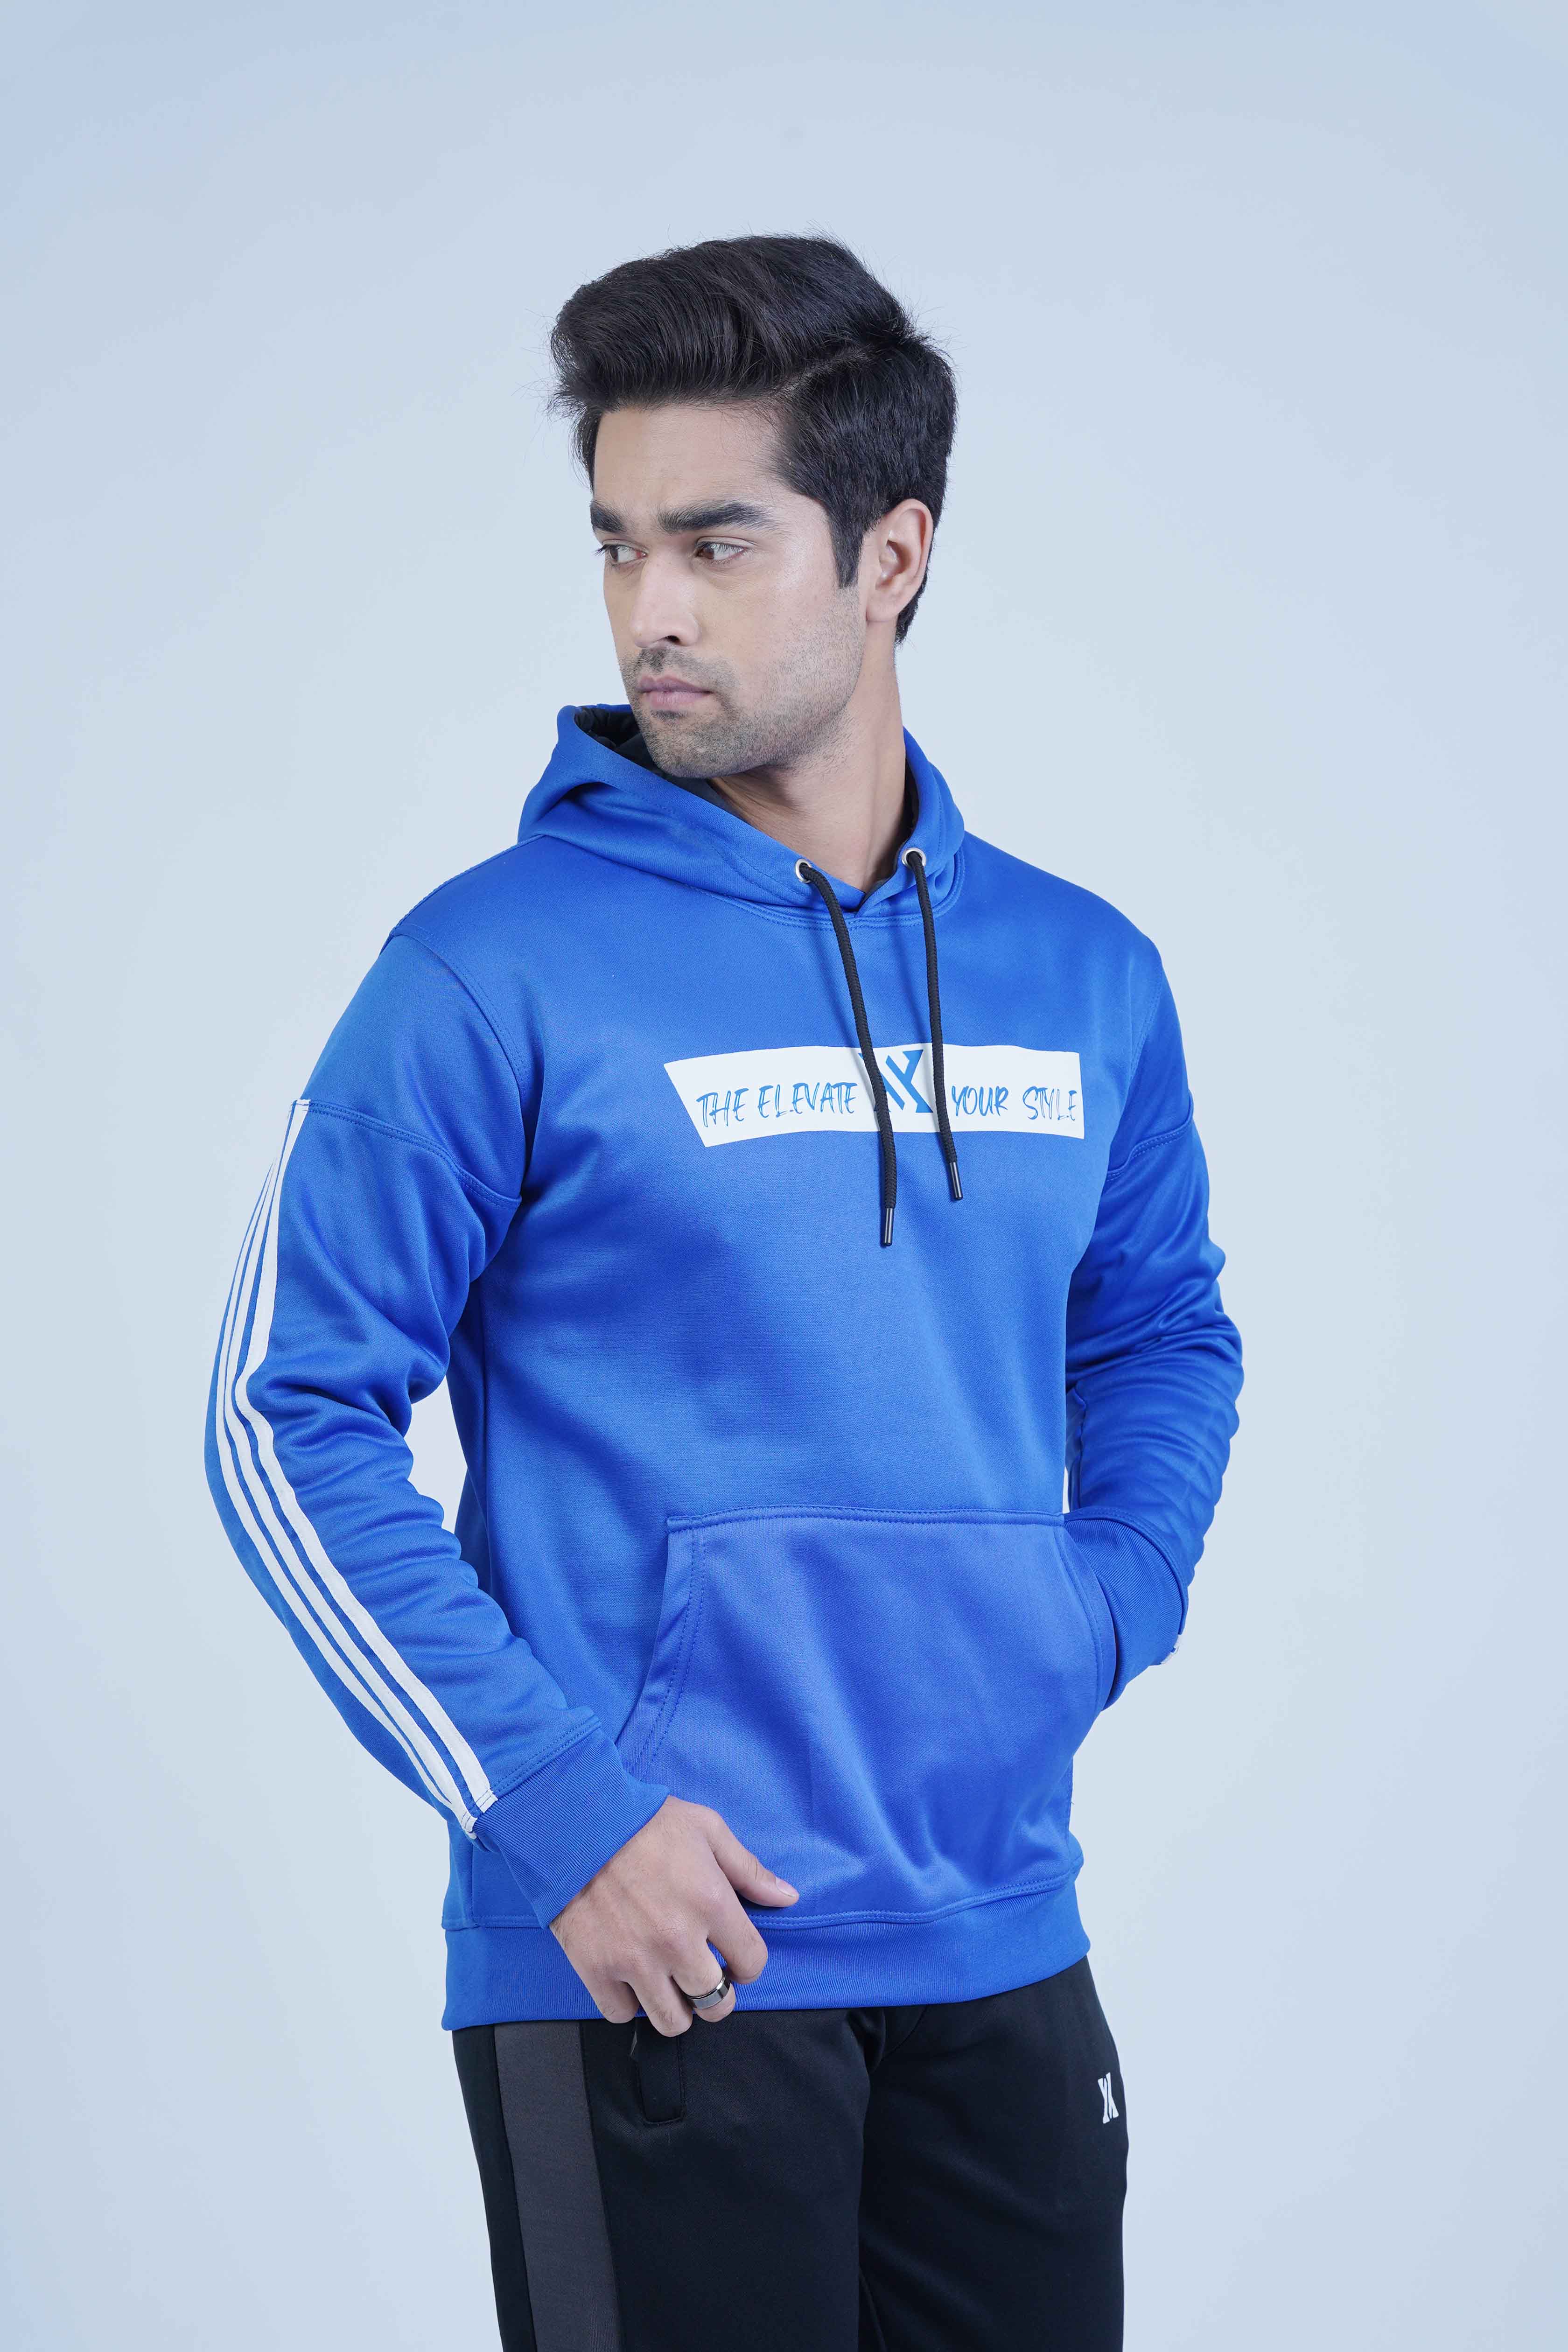 Royal Blue Hoodie from The Xea Men's Fashion